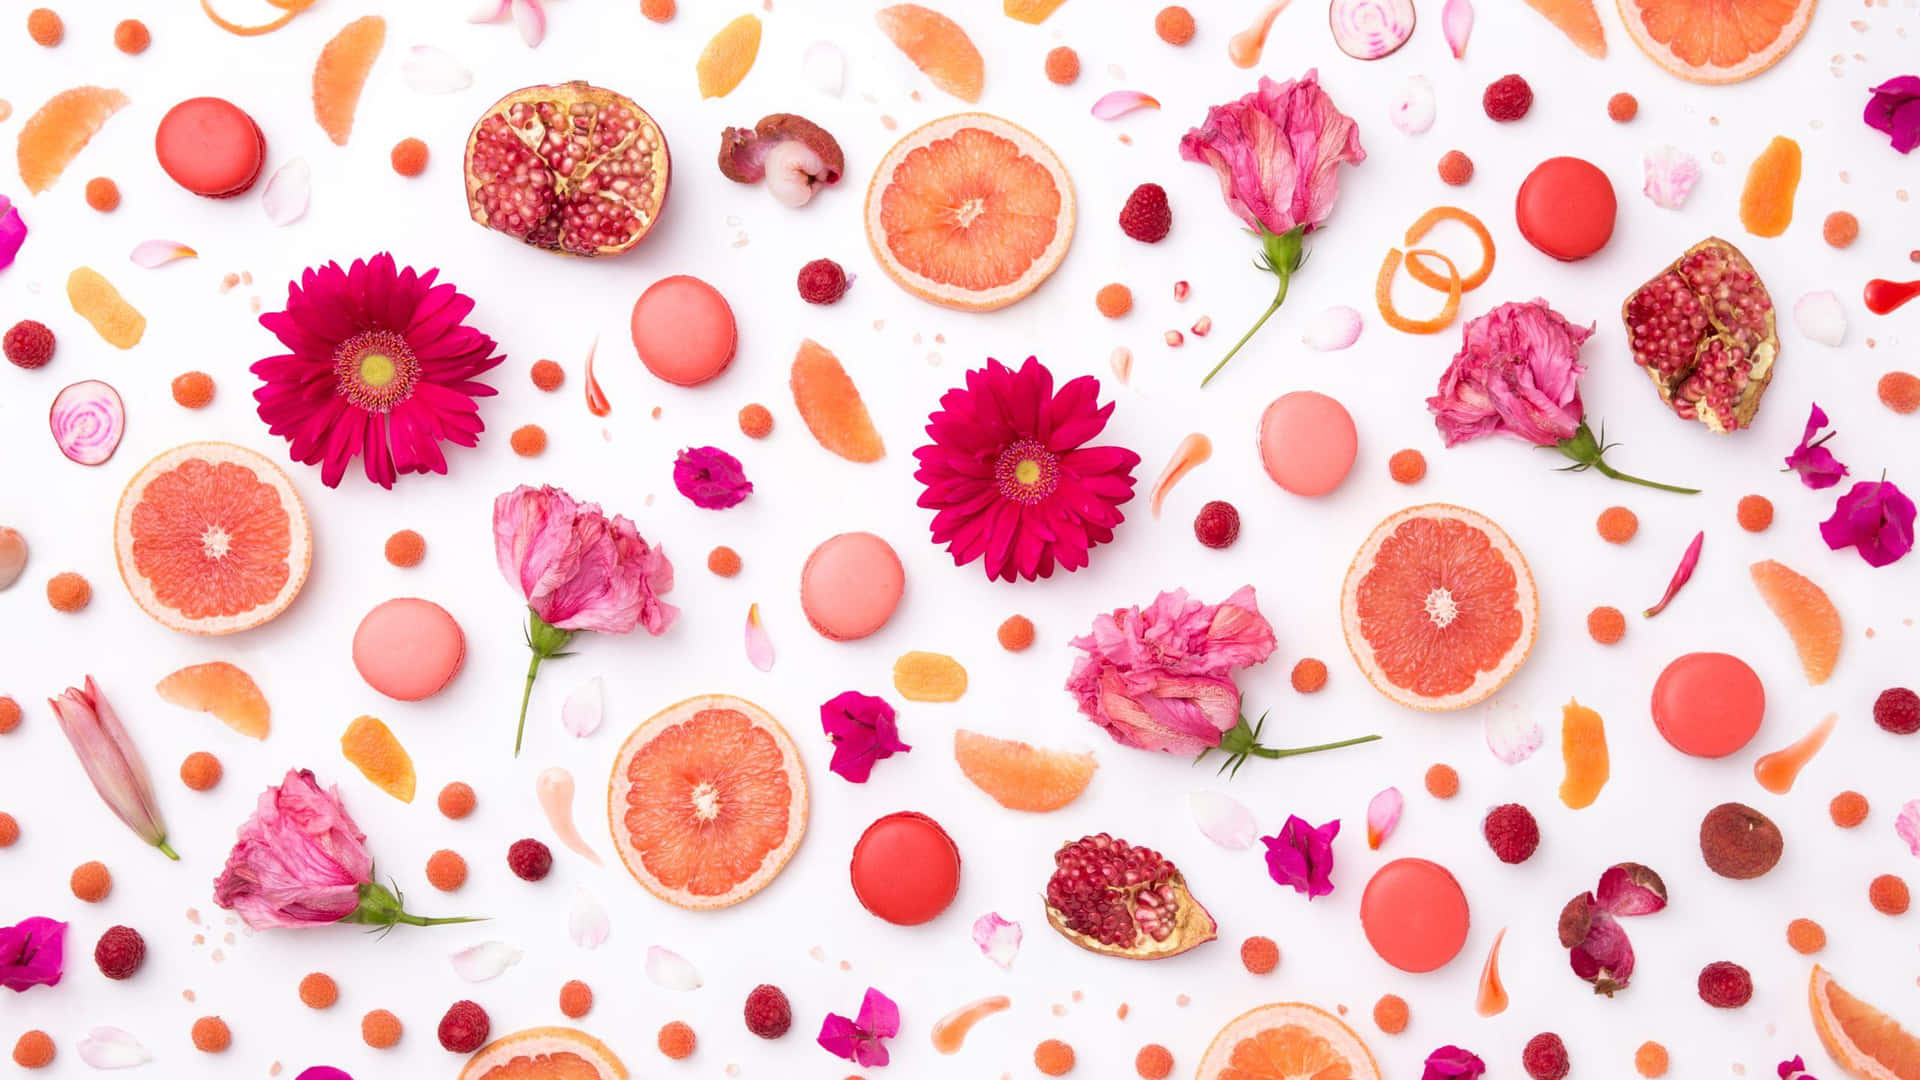 Healthy Food Pink Fruits And Flowers Picture